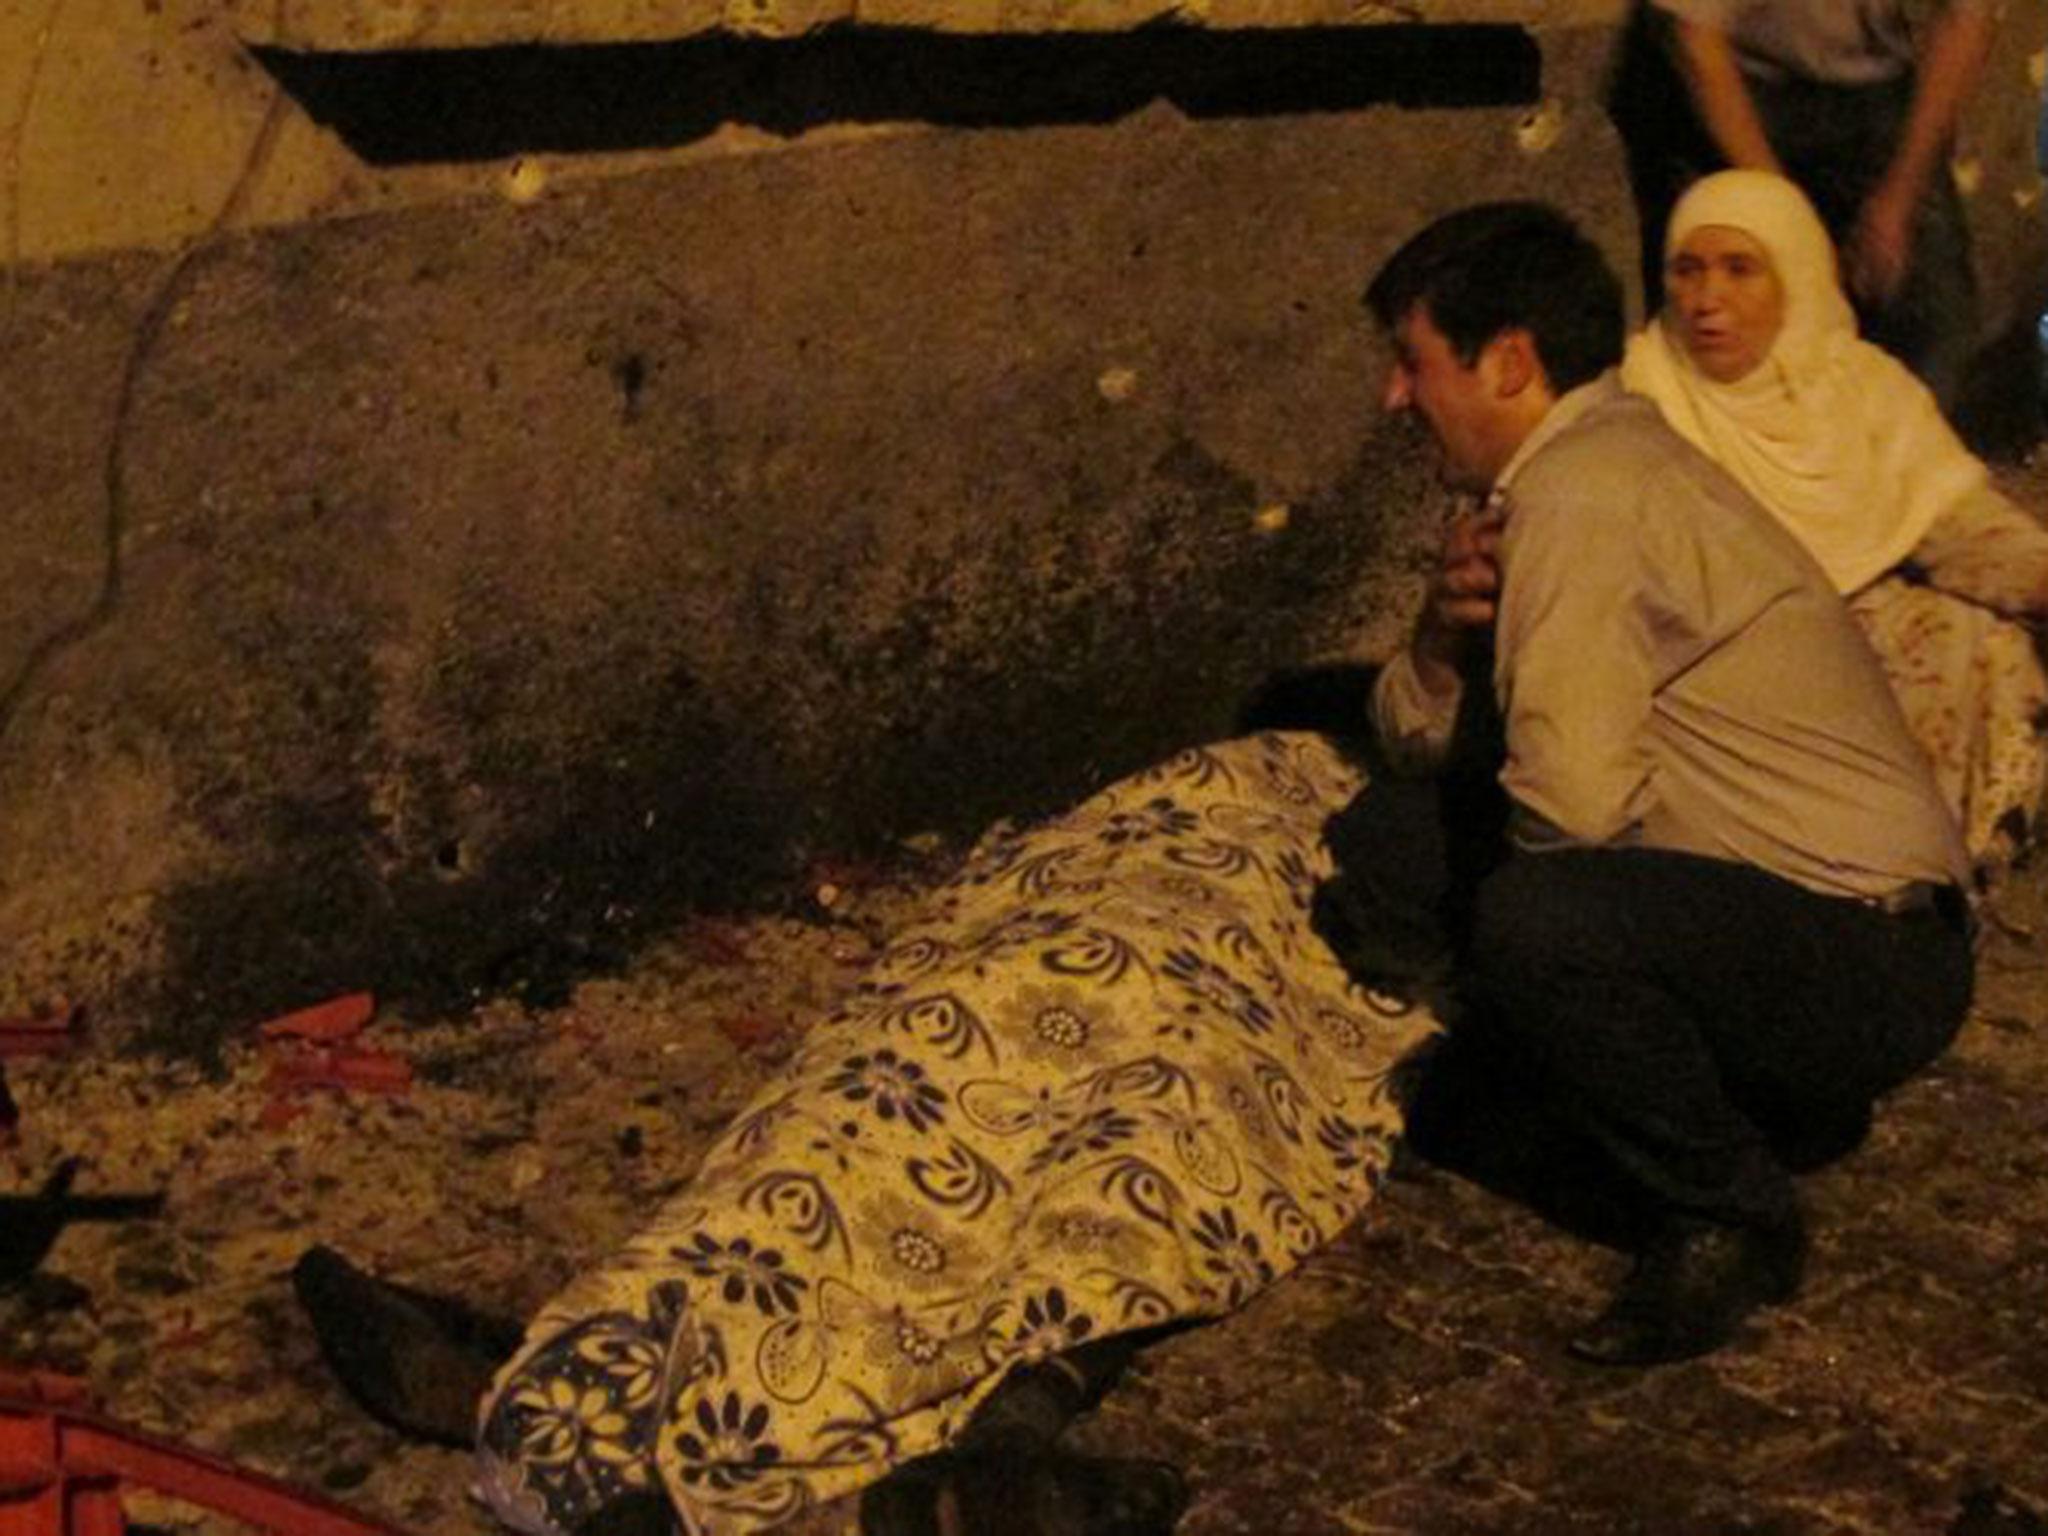 A man cries over a covered body after the explosion in Gaziantep